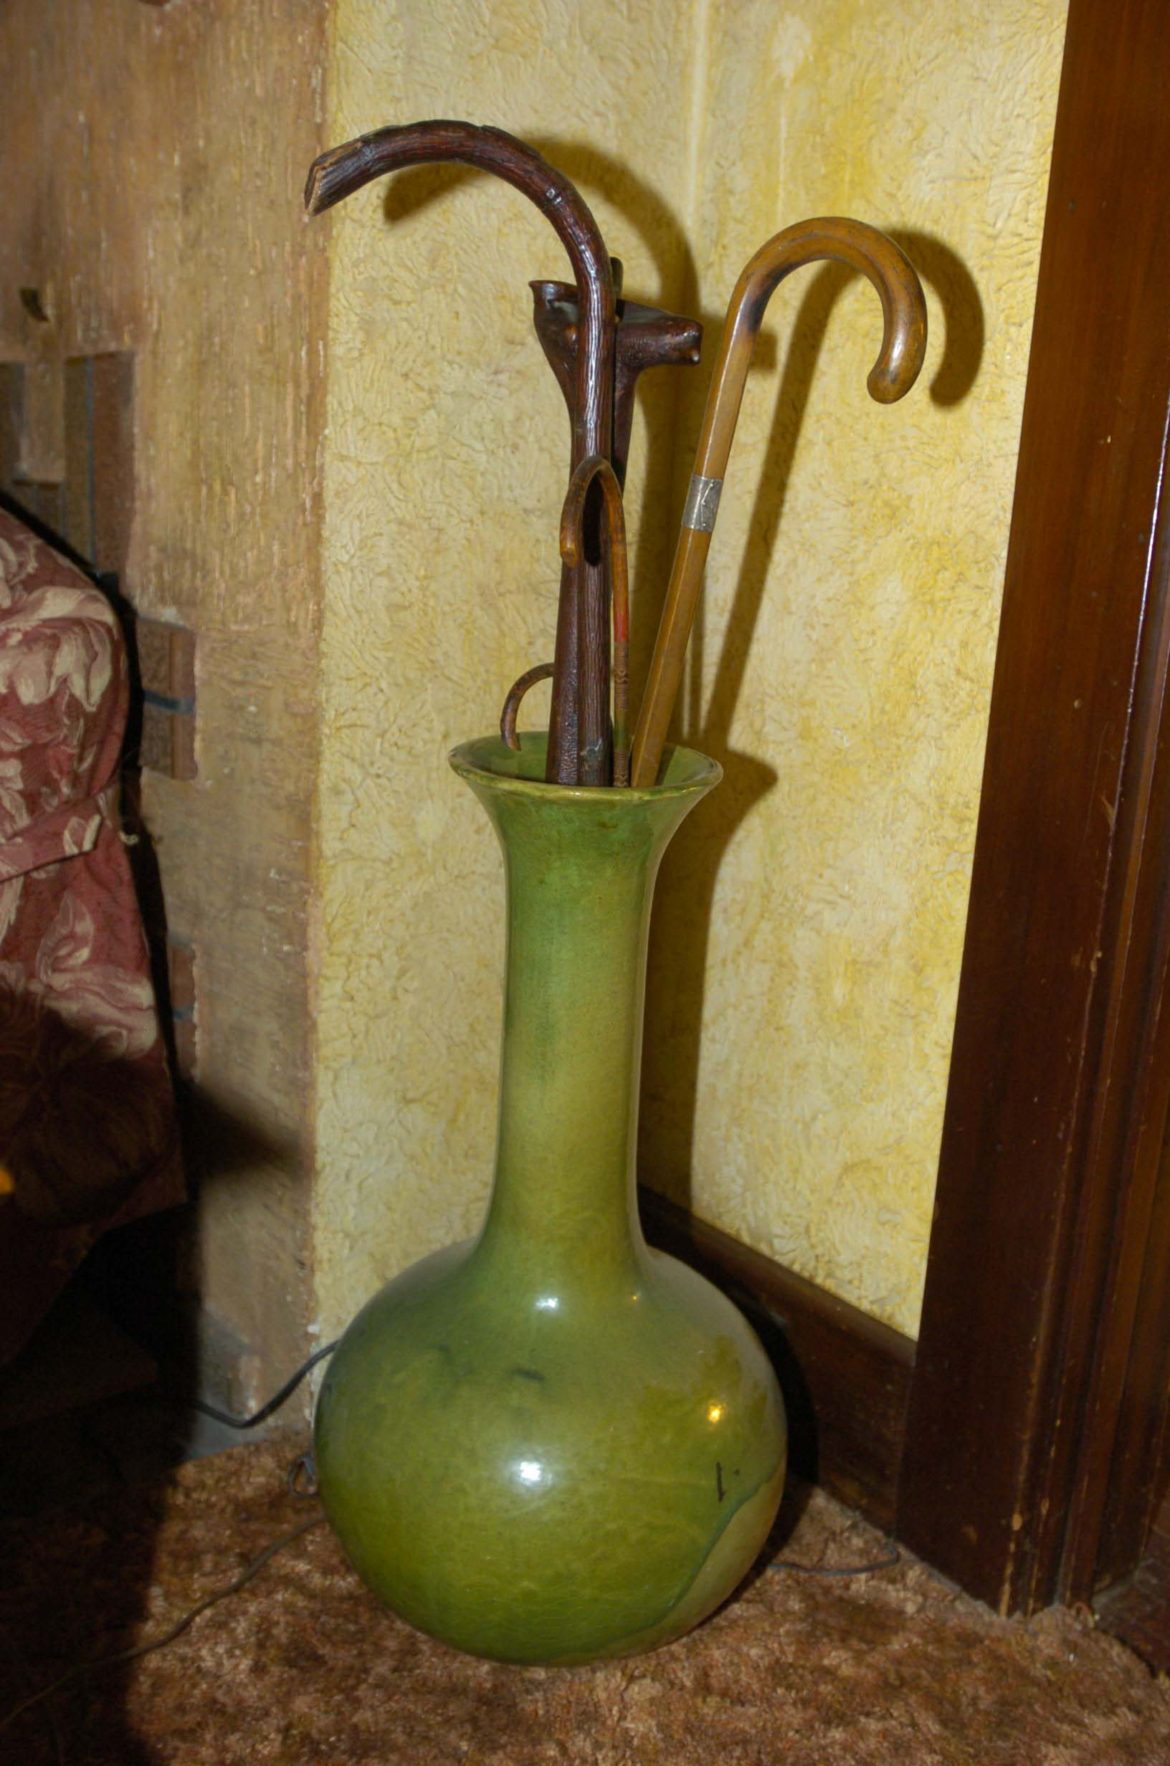 This large vase also owned by the Rannells family is believed to have been made at Woodside as well. It obviously has the same green glaze as the smaller vase. These are the only known examples of Rannells pottery. Courtesy of Greg Rannells.